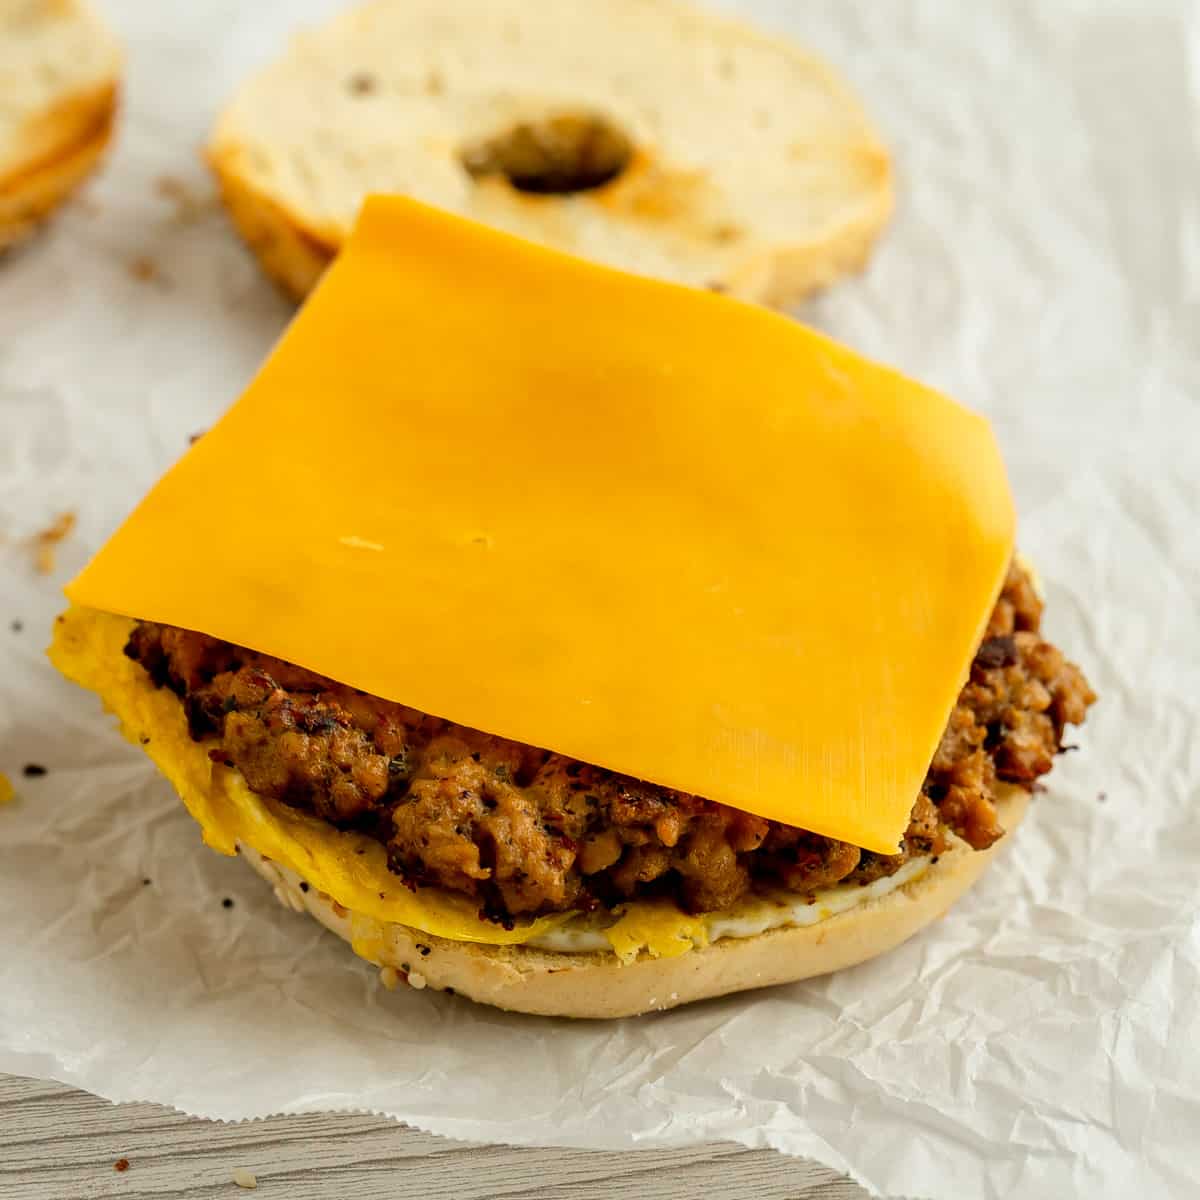 A slice of cheese on a sausage patty.